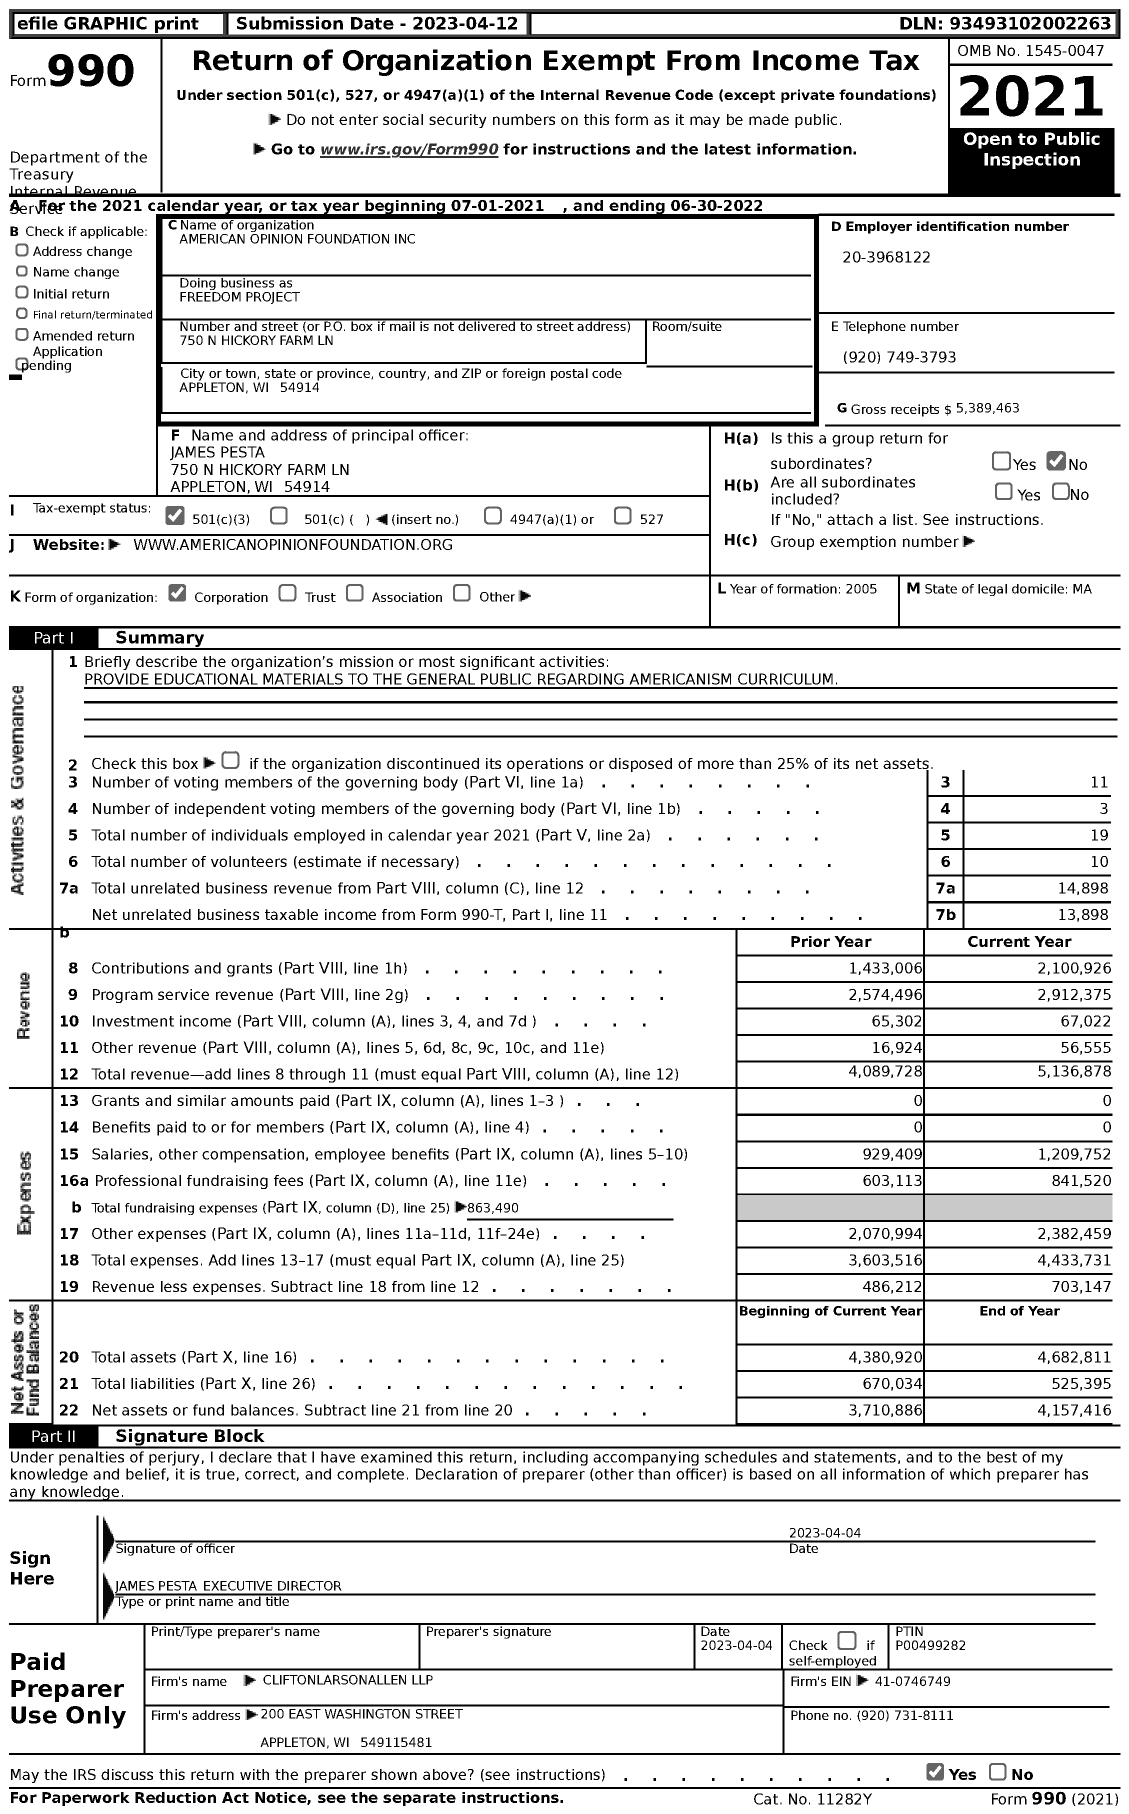 Image of first page of 2021 Form 990 for Freedom Project / American Opinion Foundation Inc